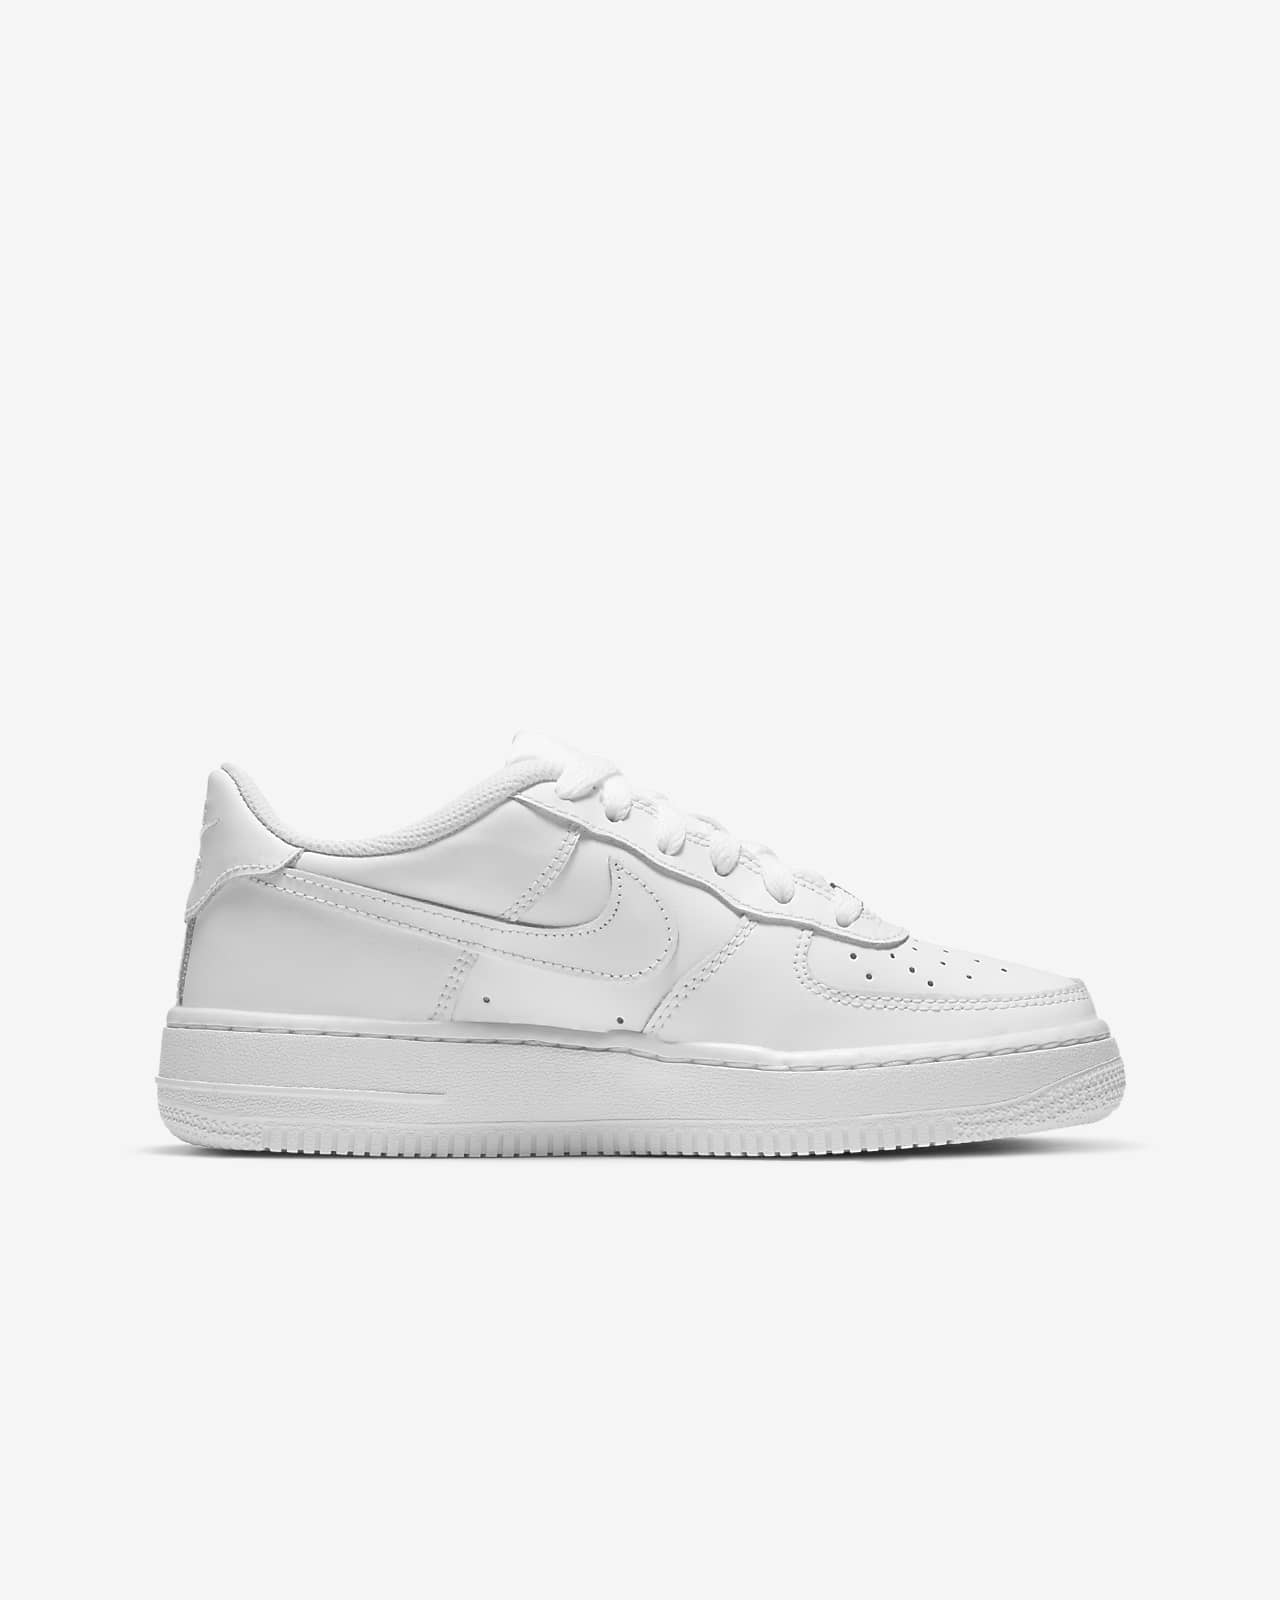 air force 1 kids size 3.5